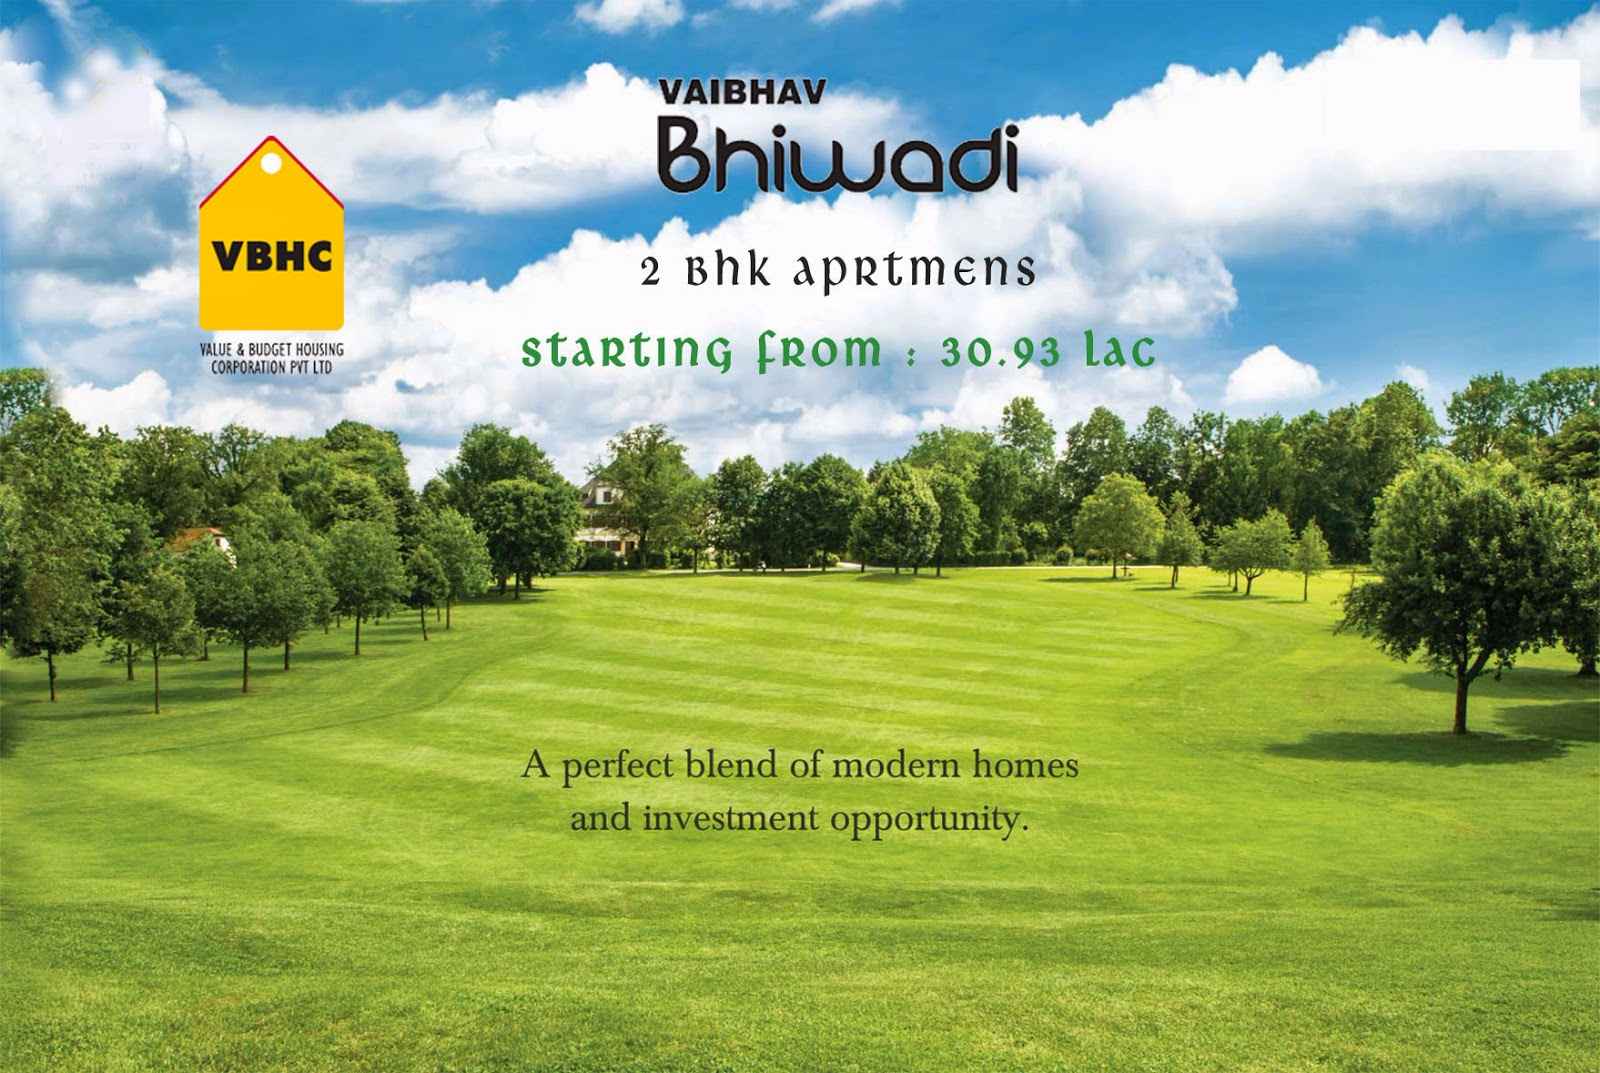 VBHC Vaibhav Bhiwadi is a complete blend of modern homes and investment opportunity Update